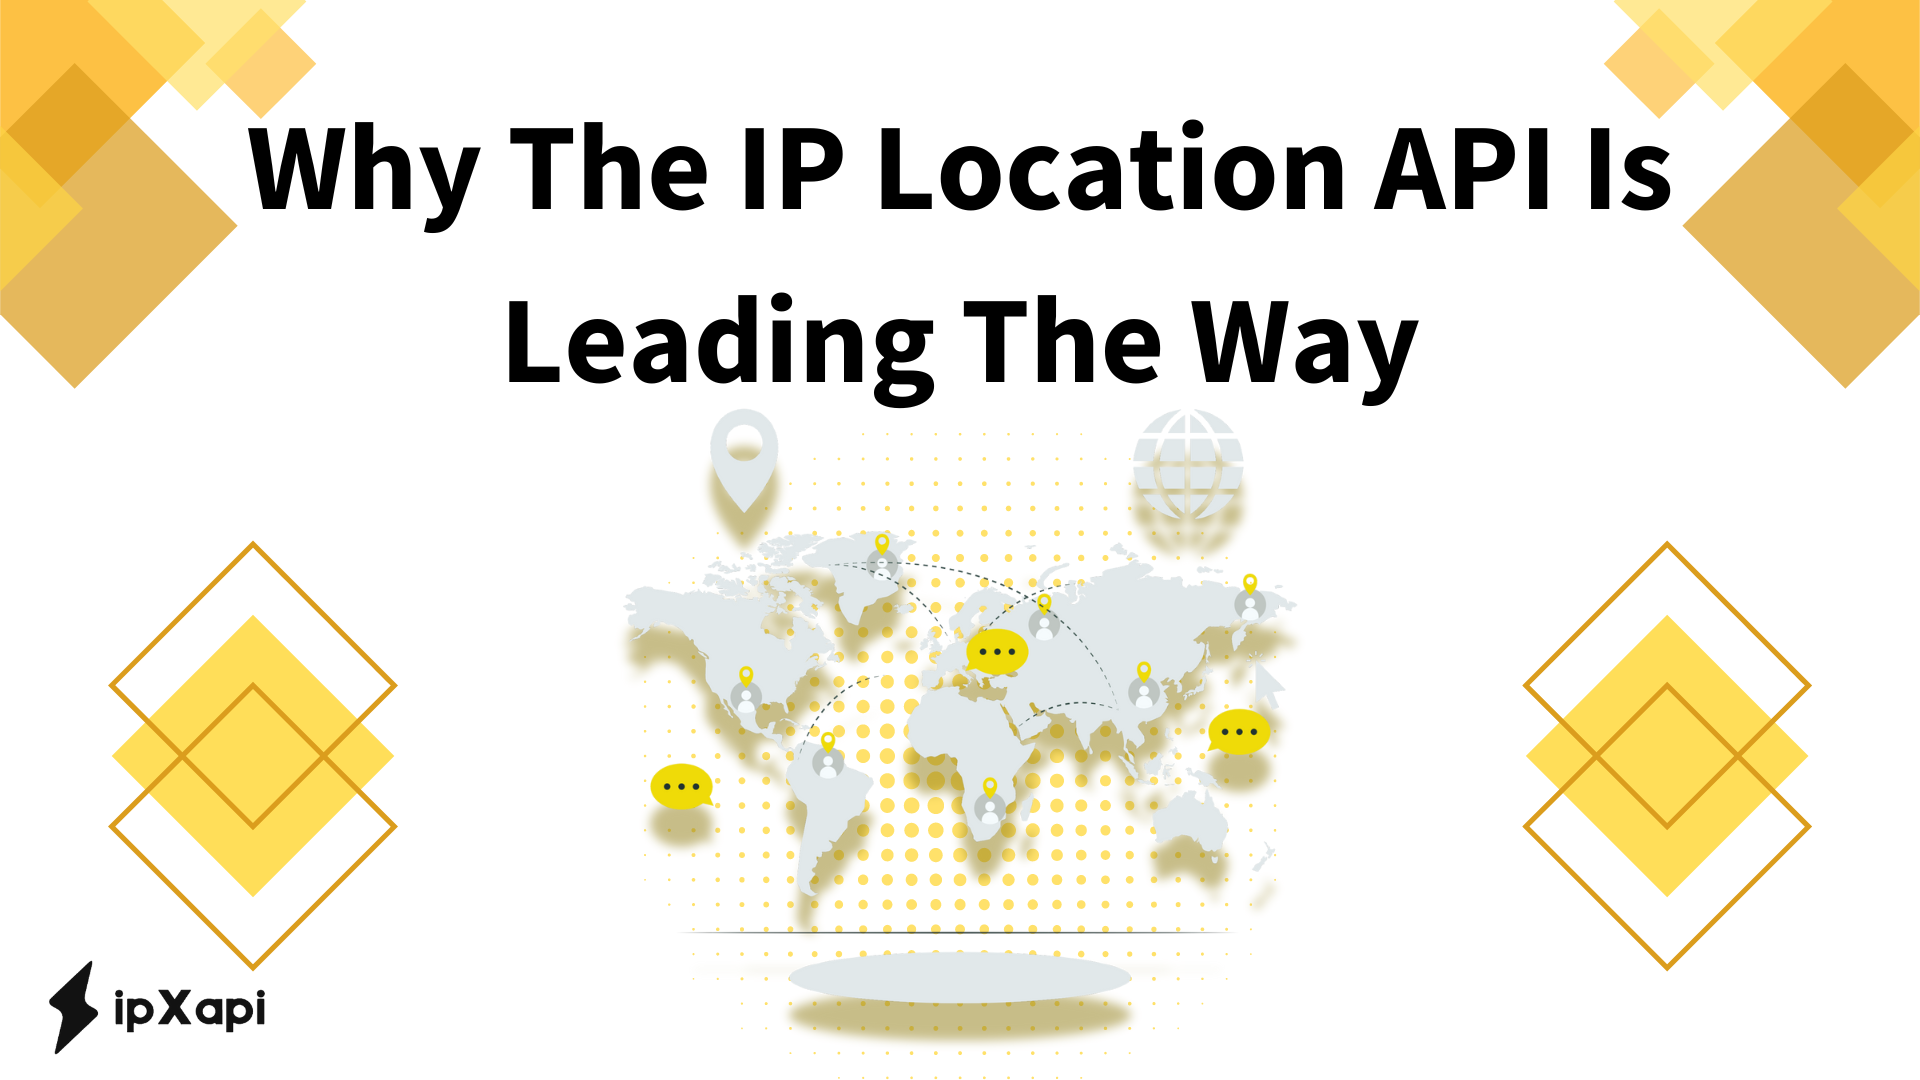 Why The IP Location API Is Leading The Way